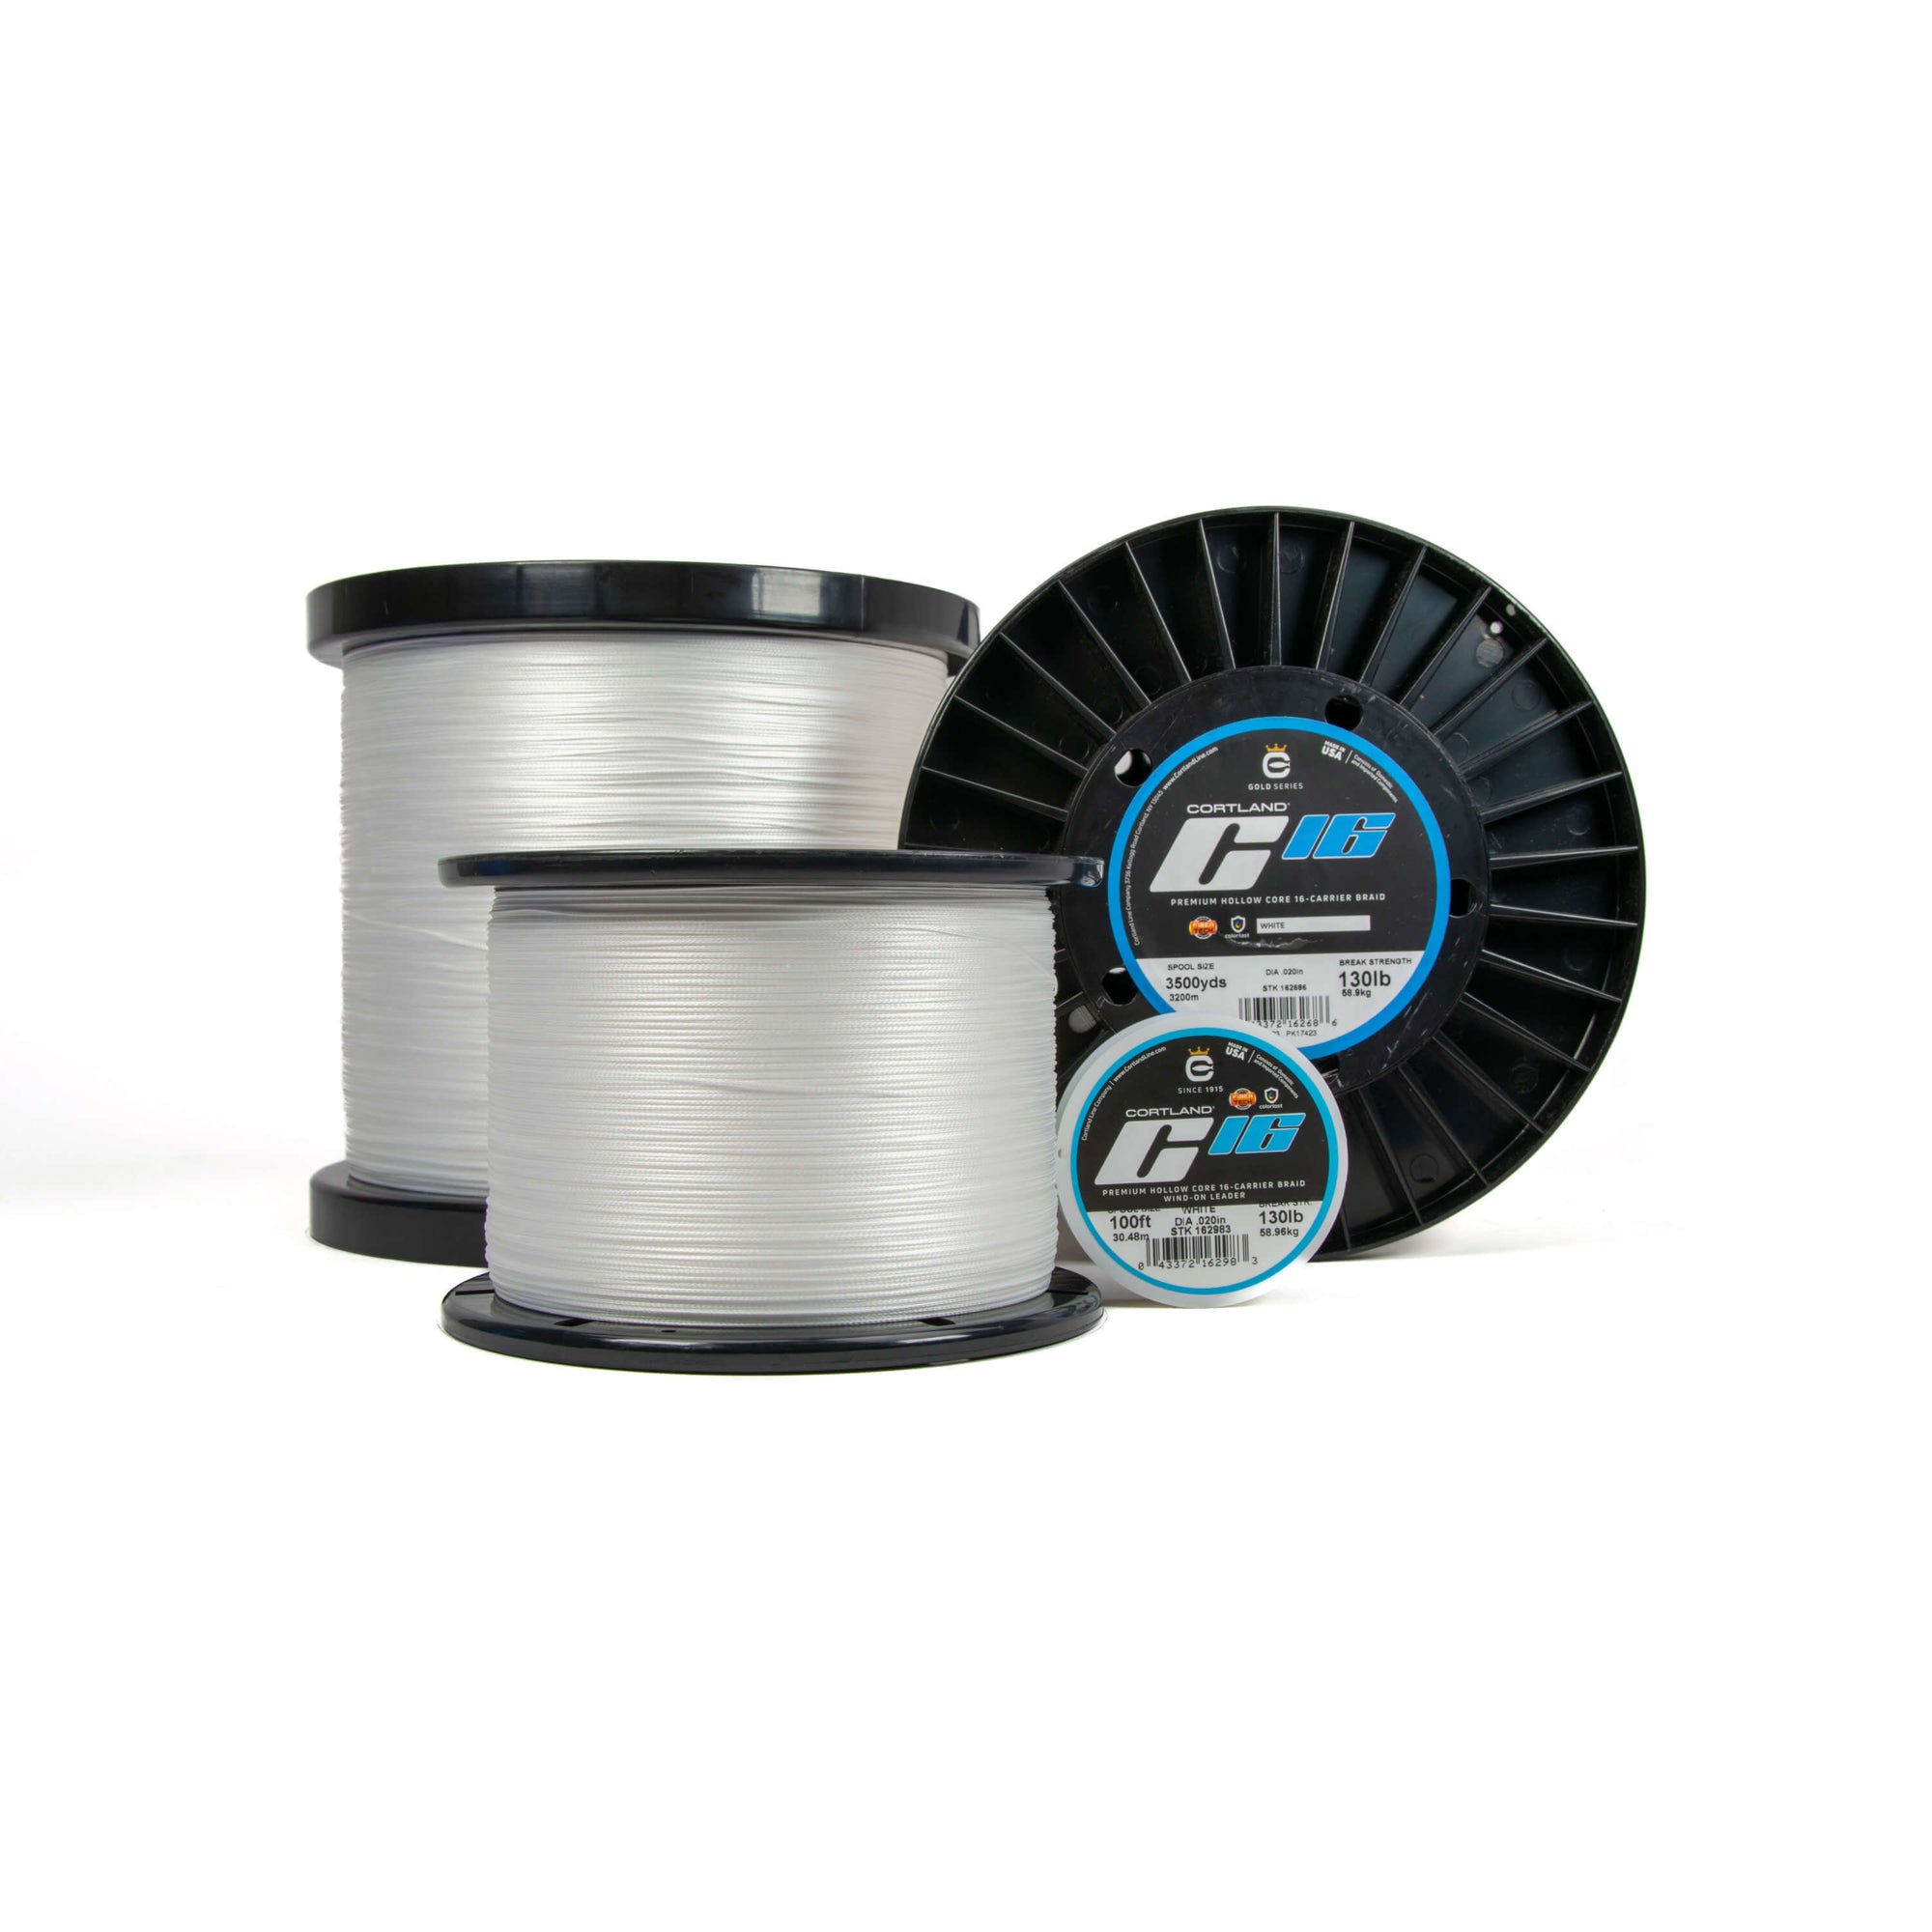 Kona Fishing Supply - We have great prices on hollow core braided